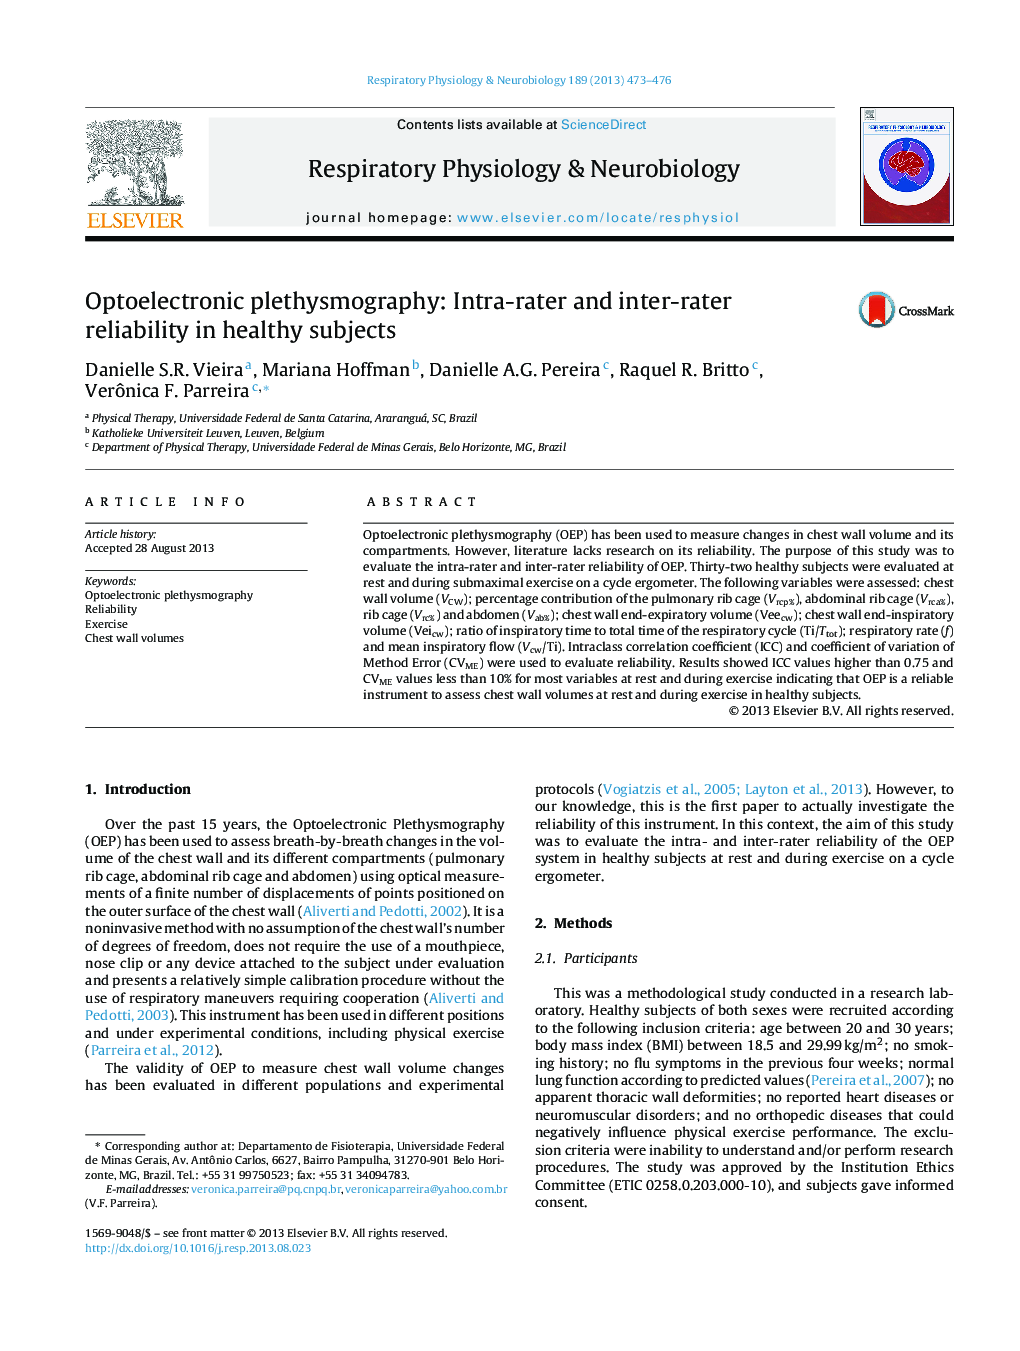 Optoelectronic plethysmography: Intra-rater and inter-rater reliability in healthy subjects